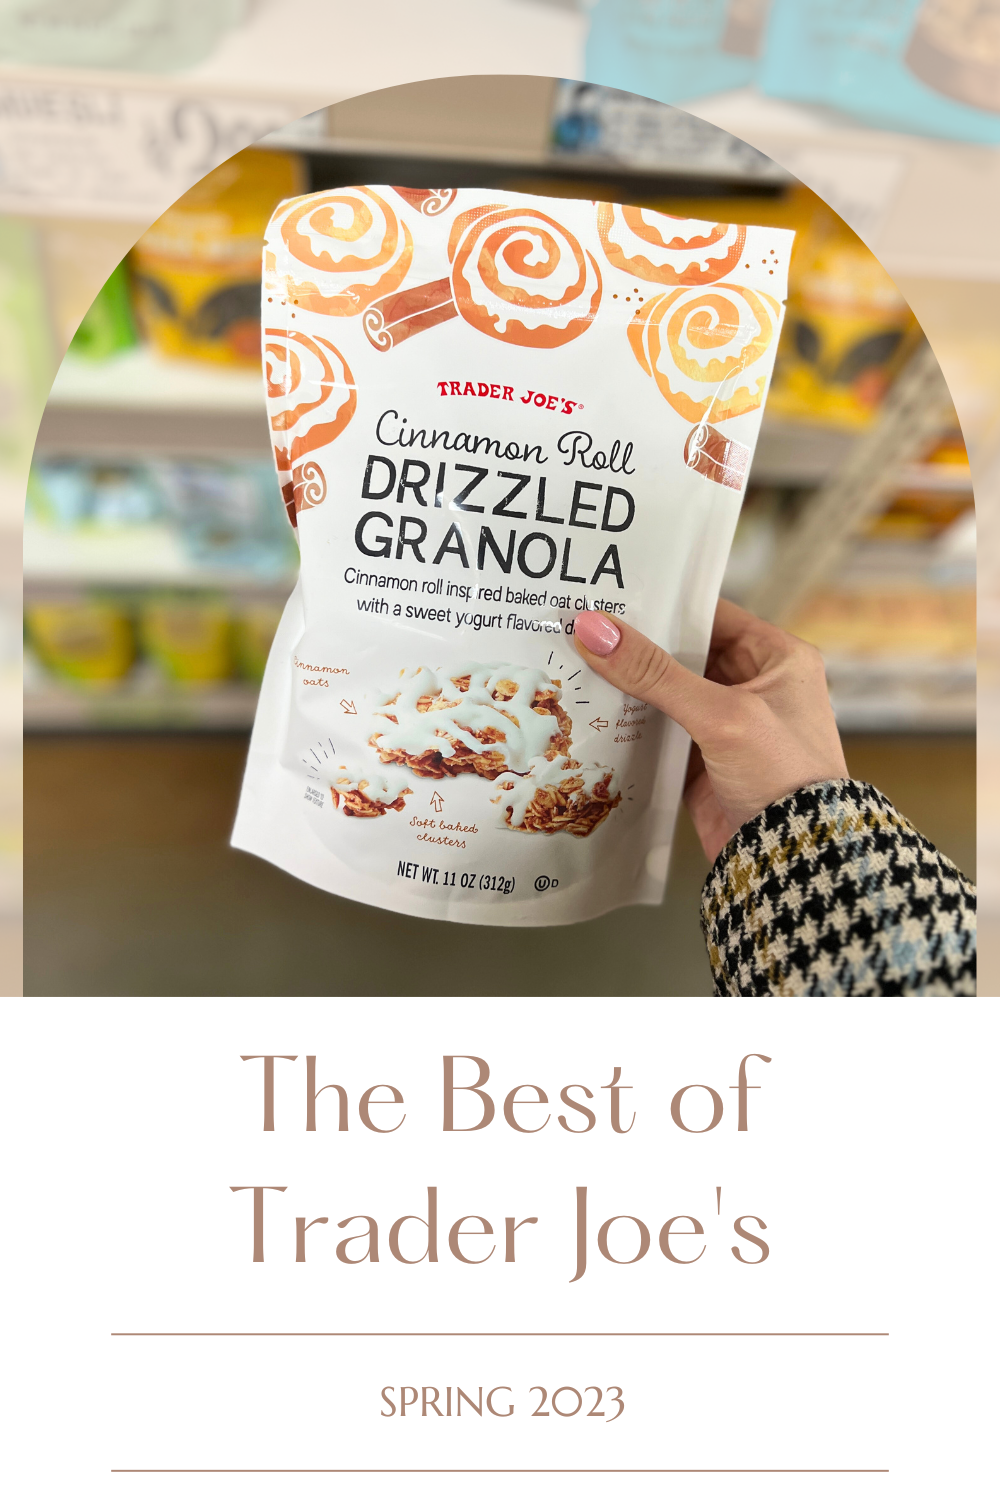 The Best of Trader Joe’s (Spring 2023)